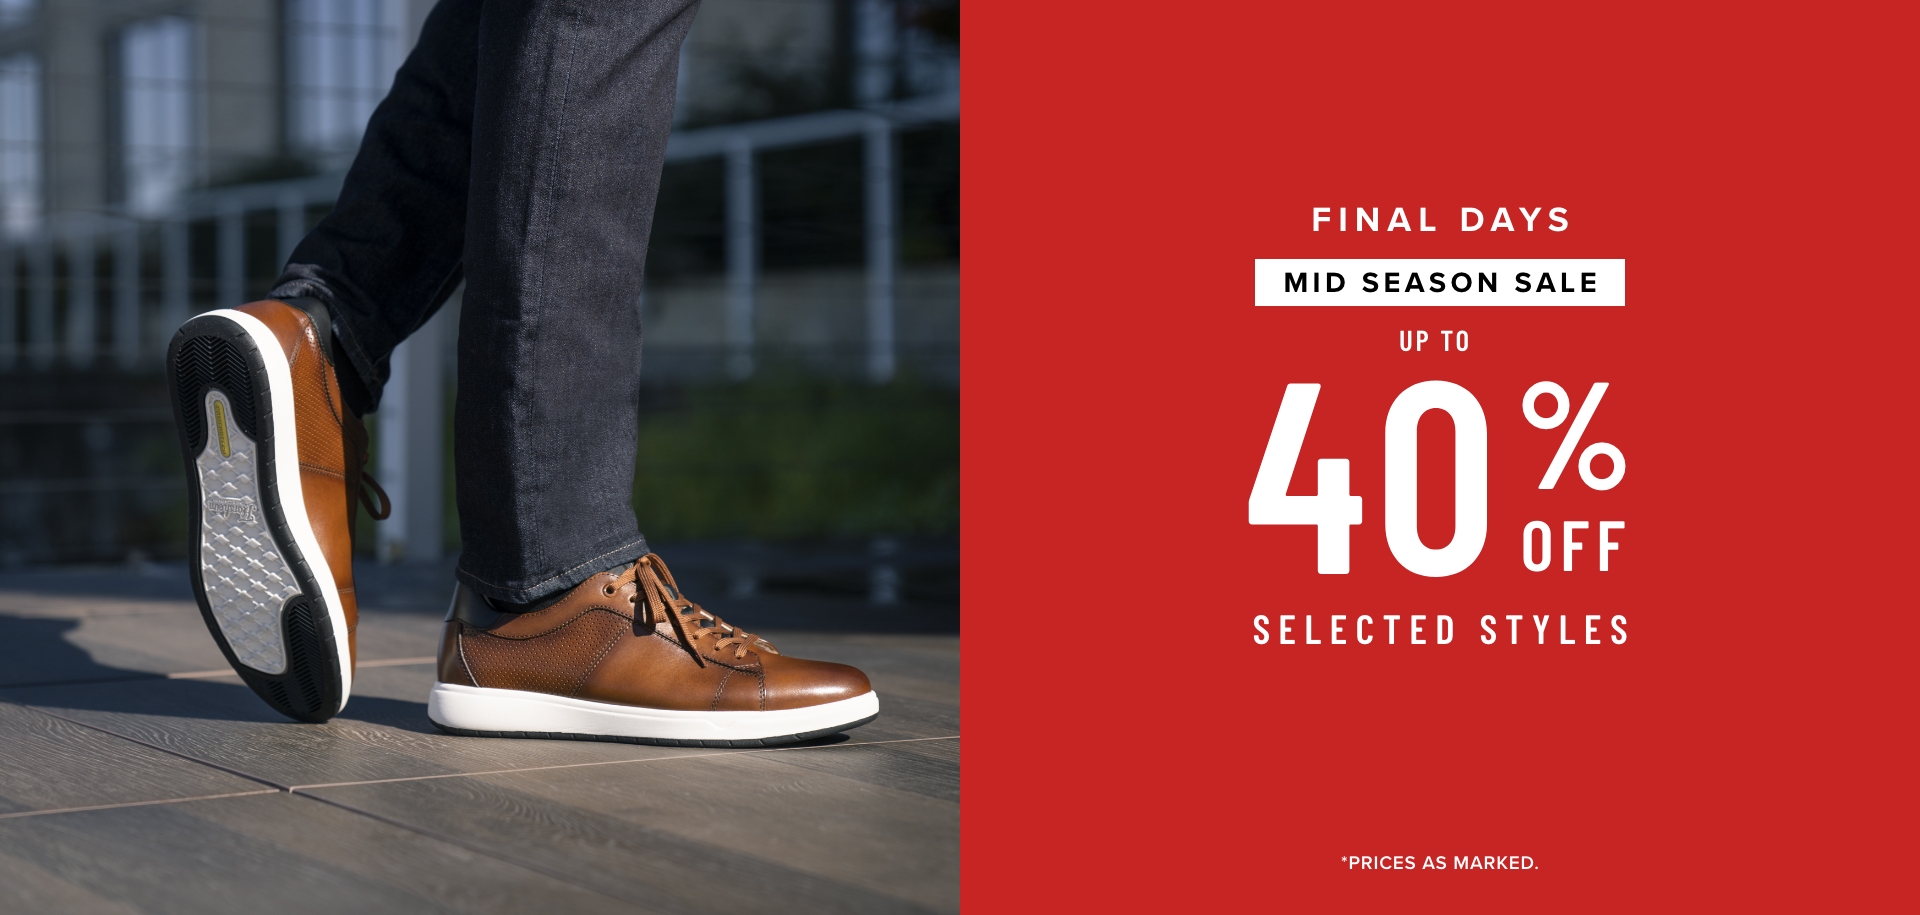 Mid Season Sale Up to 40% off